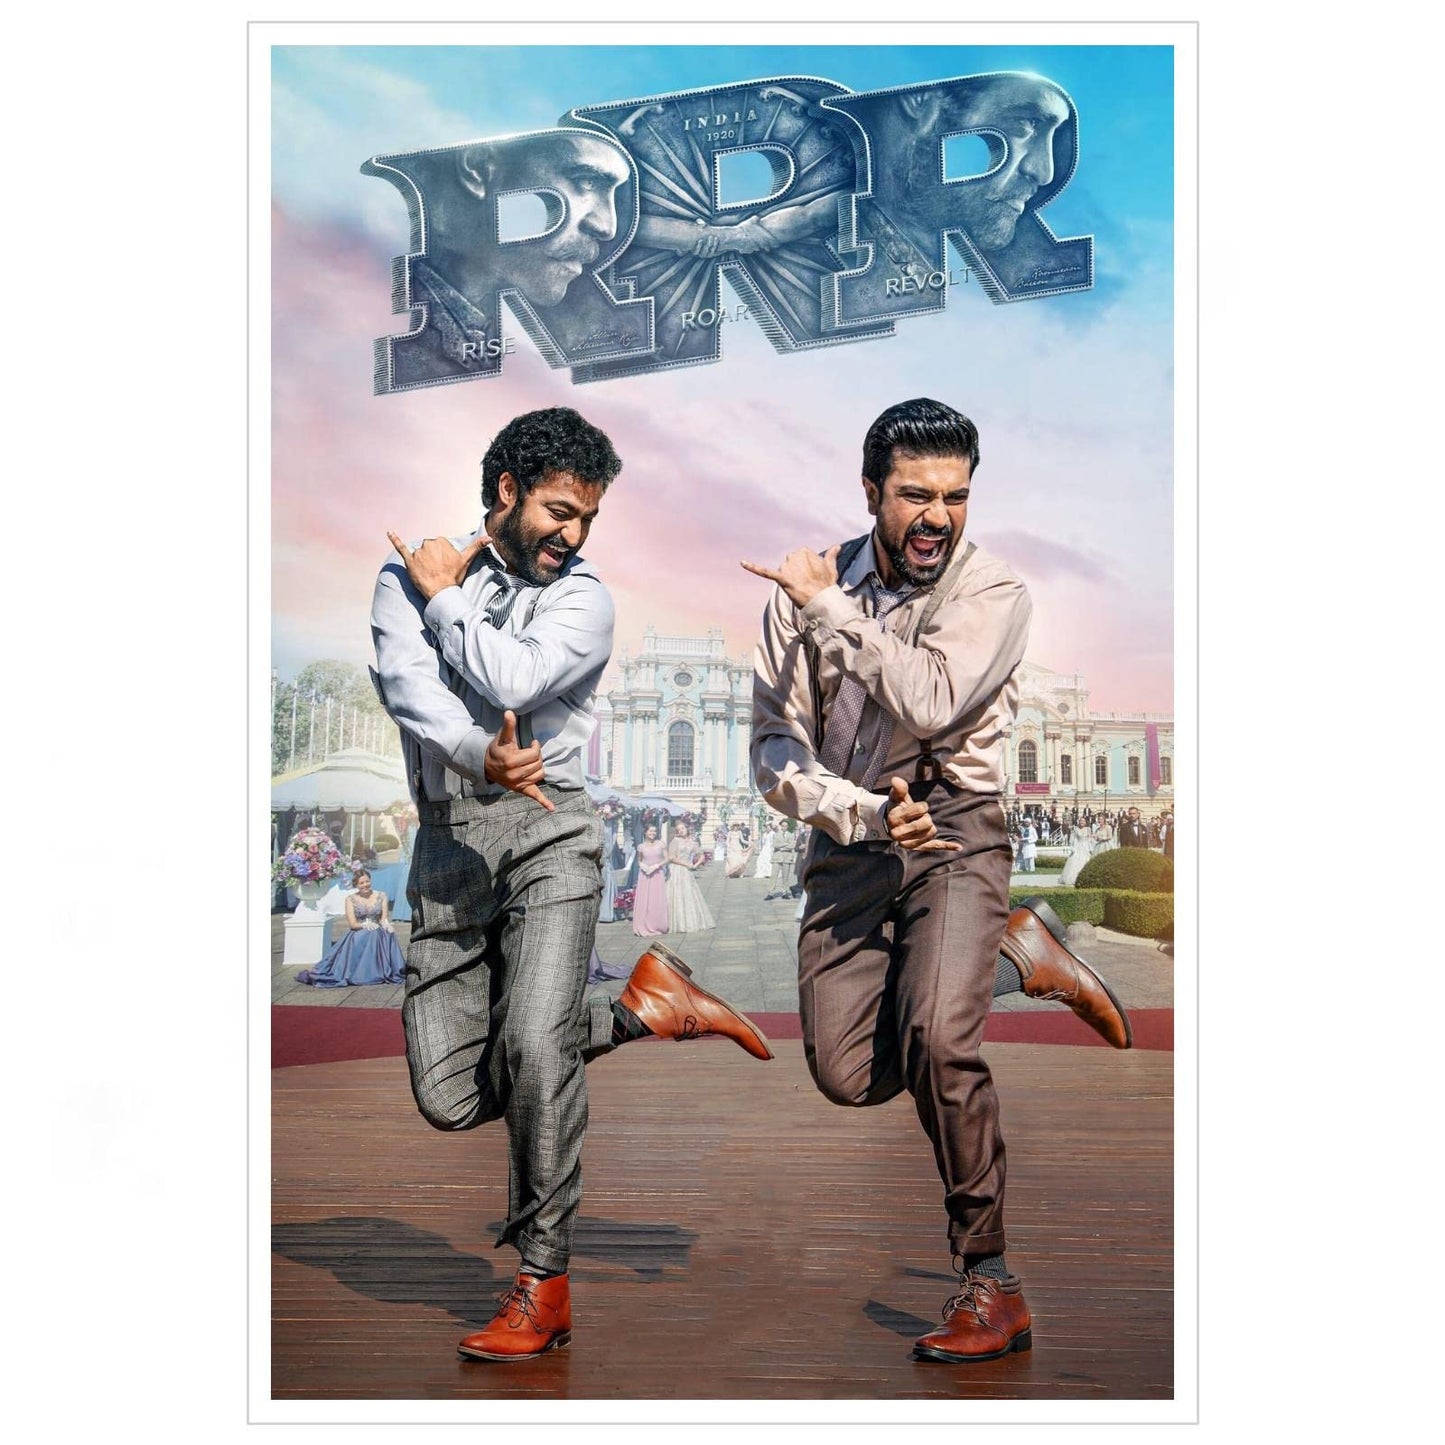 TOVAA 2022 New Indian Movie RRR Canvas Prints Roudram Ranam Rudhiram Funny Film Poster Wall Art For Home Office Bathroom Decorations Unframed 18"x12"